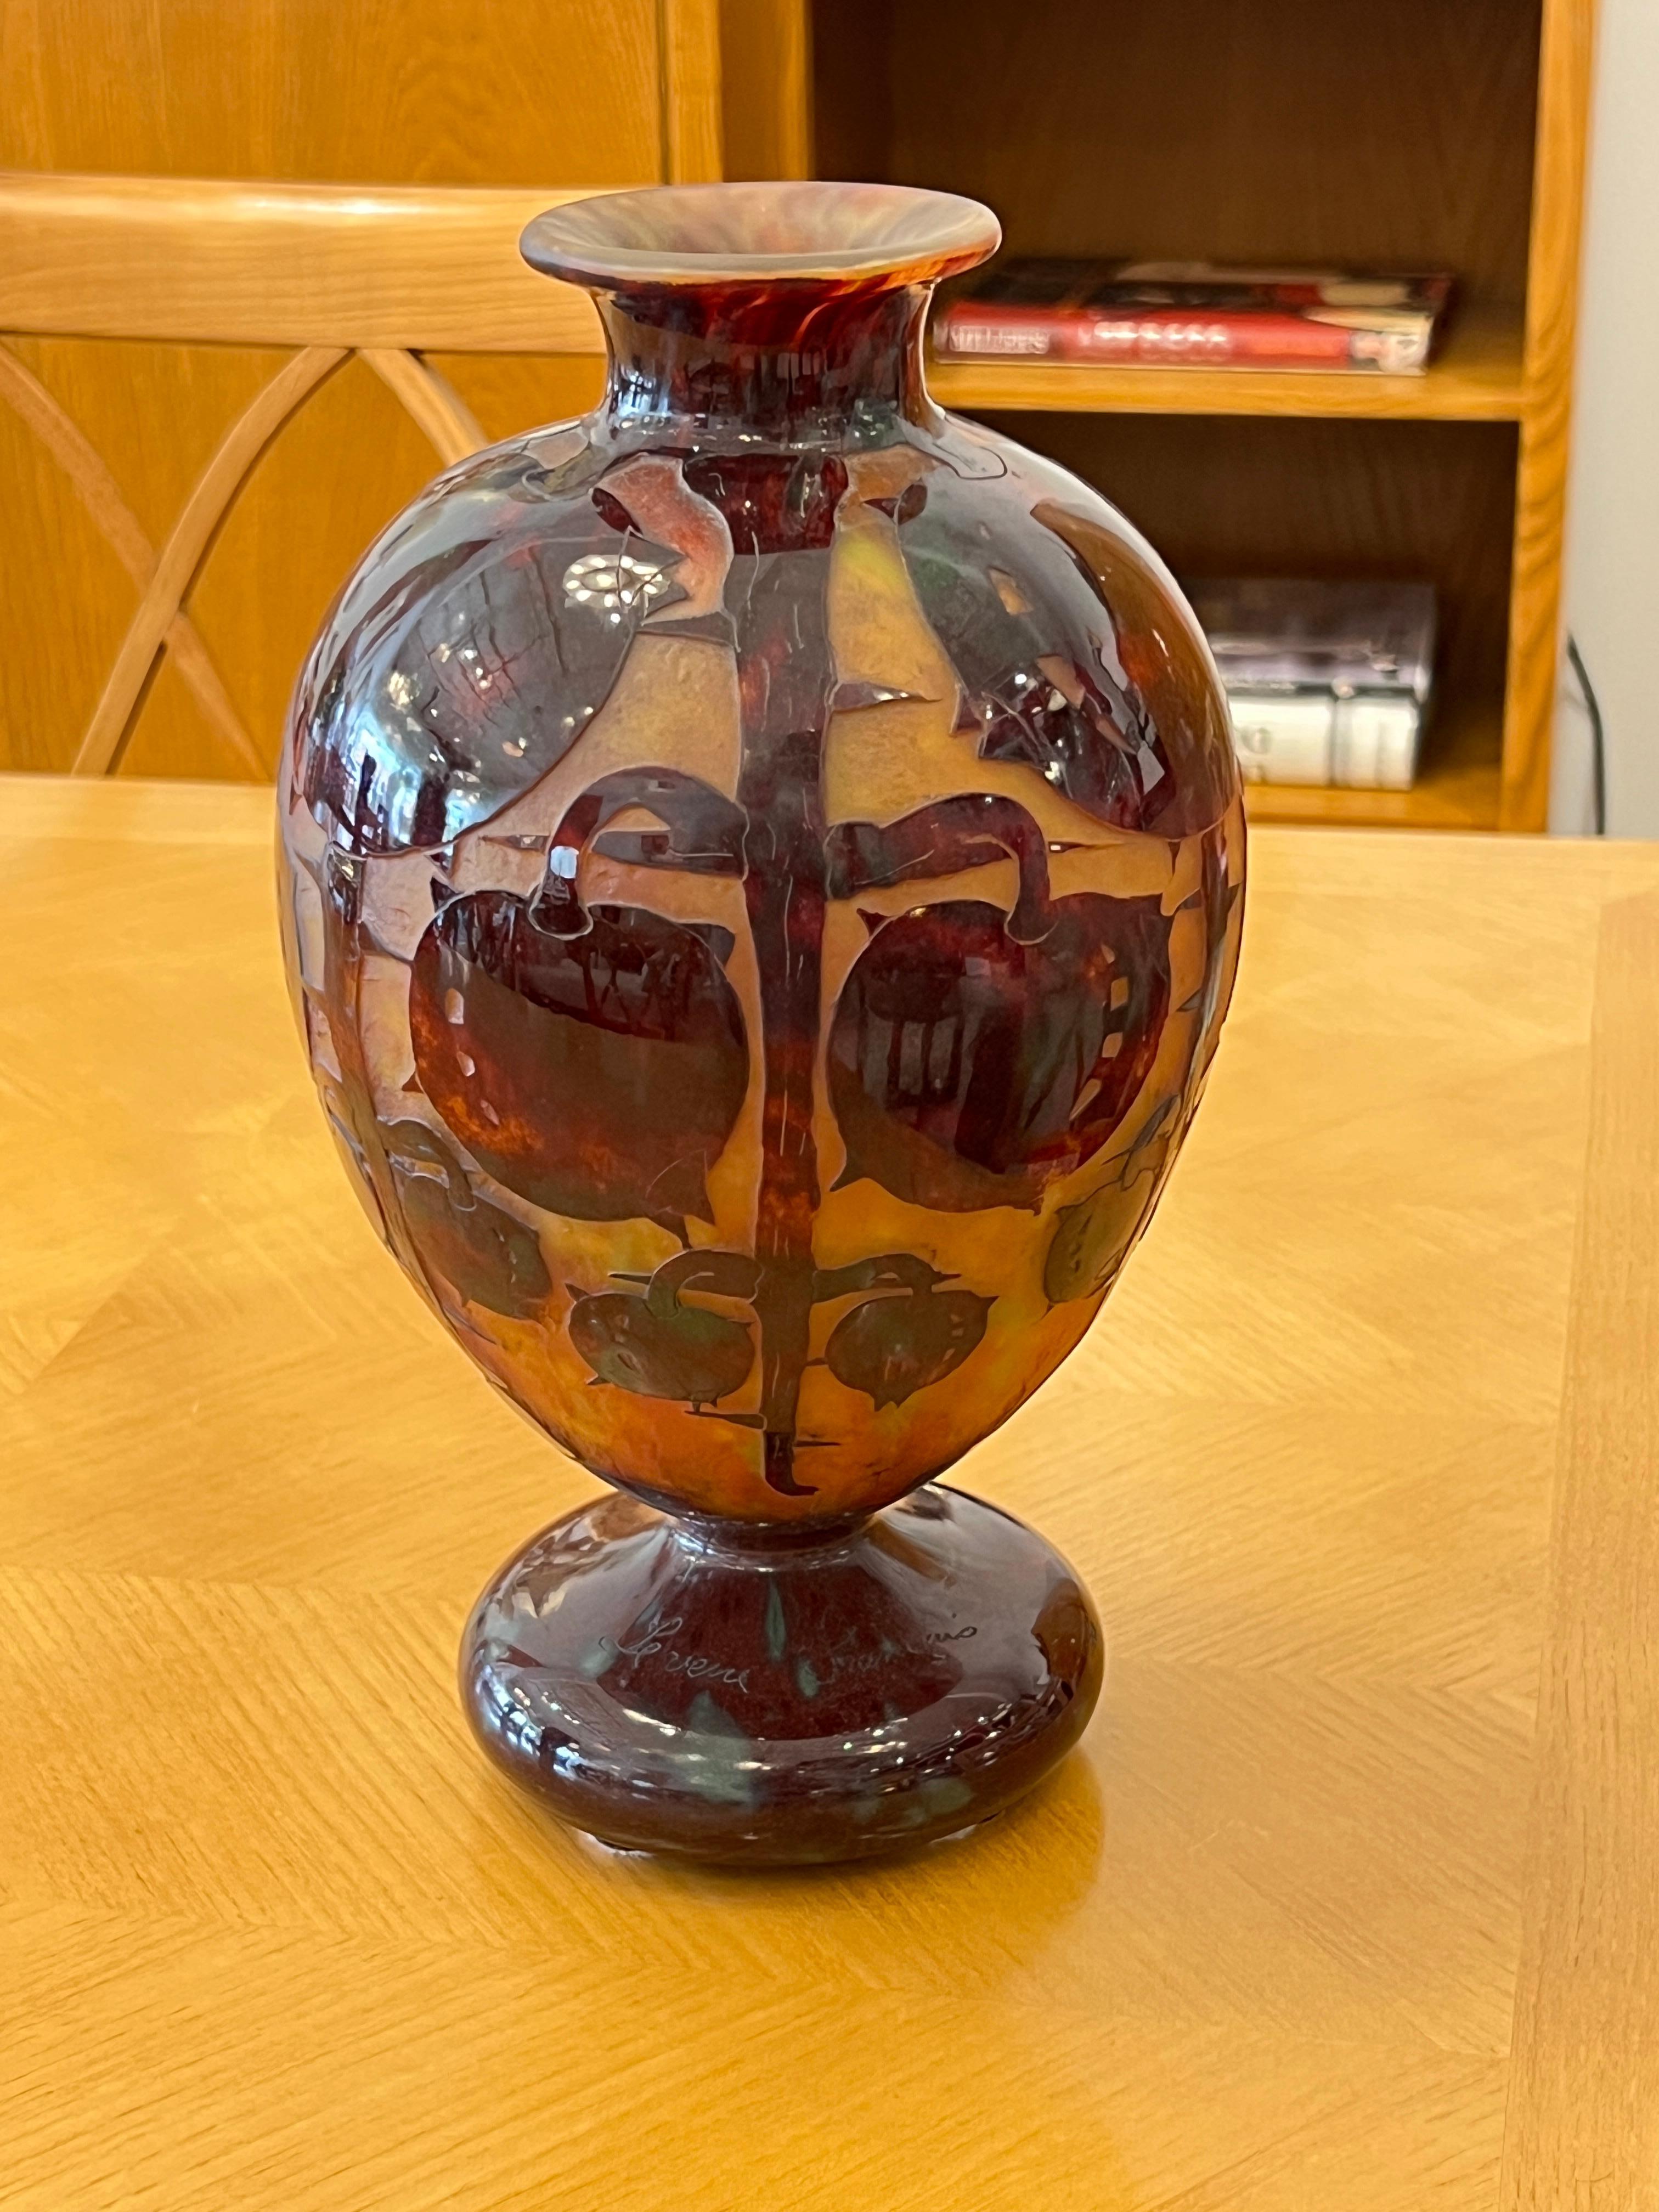 Art Deco glass vase with a Dark Violet foot and Dark Brown chestnut fruits with its vines that are acid-etched on a satiné Yellow back that washes off to Orange. This piece belongs to the Maroons serie designed by Charles Schneider for Le Verre